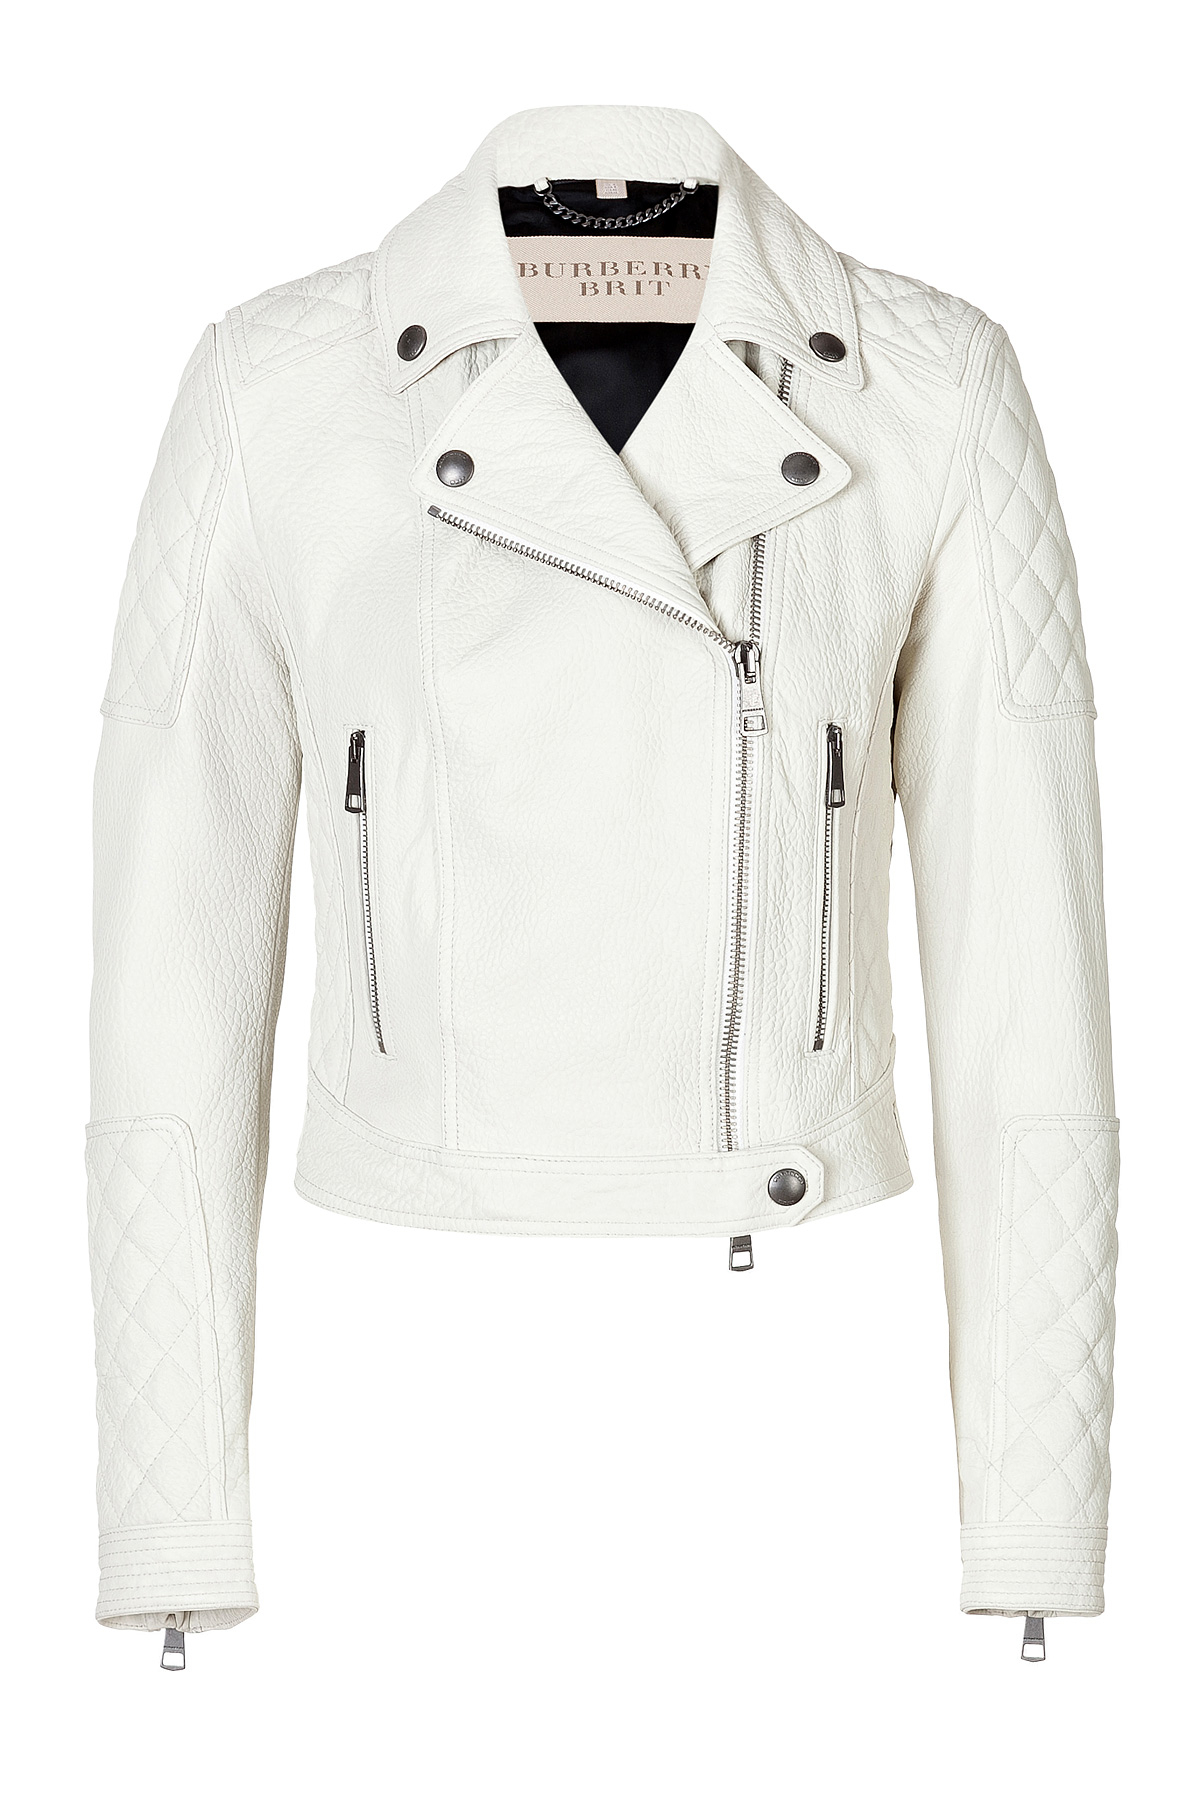 Lyst - Burberry brit Cropped Leather Motorcycle Jacket In White in White